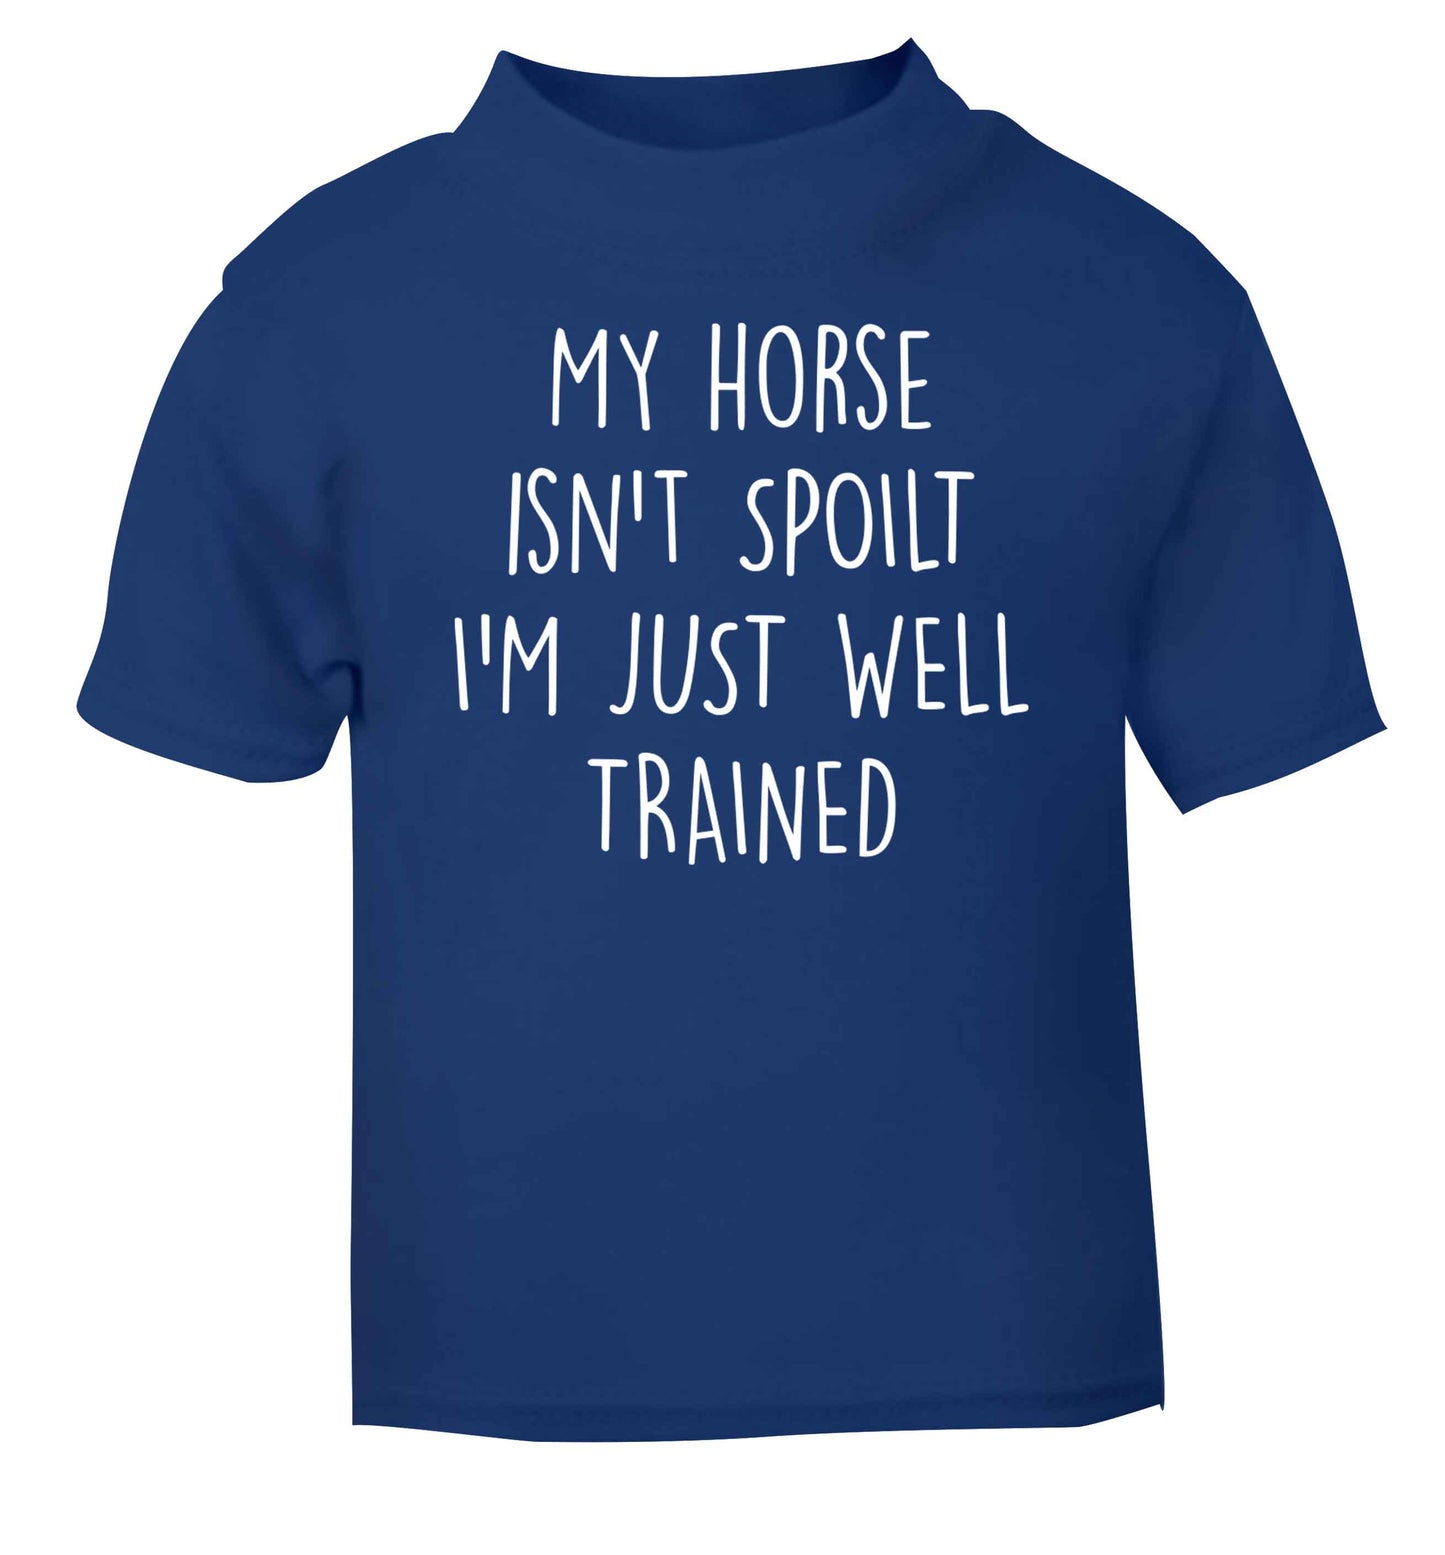 My horse isn't spoilt I'm just well trained blue baby toddler Tshirt 2 Years